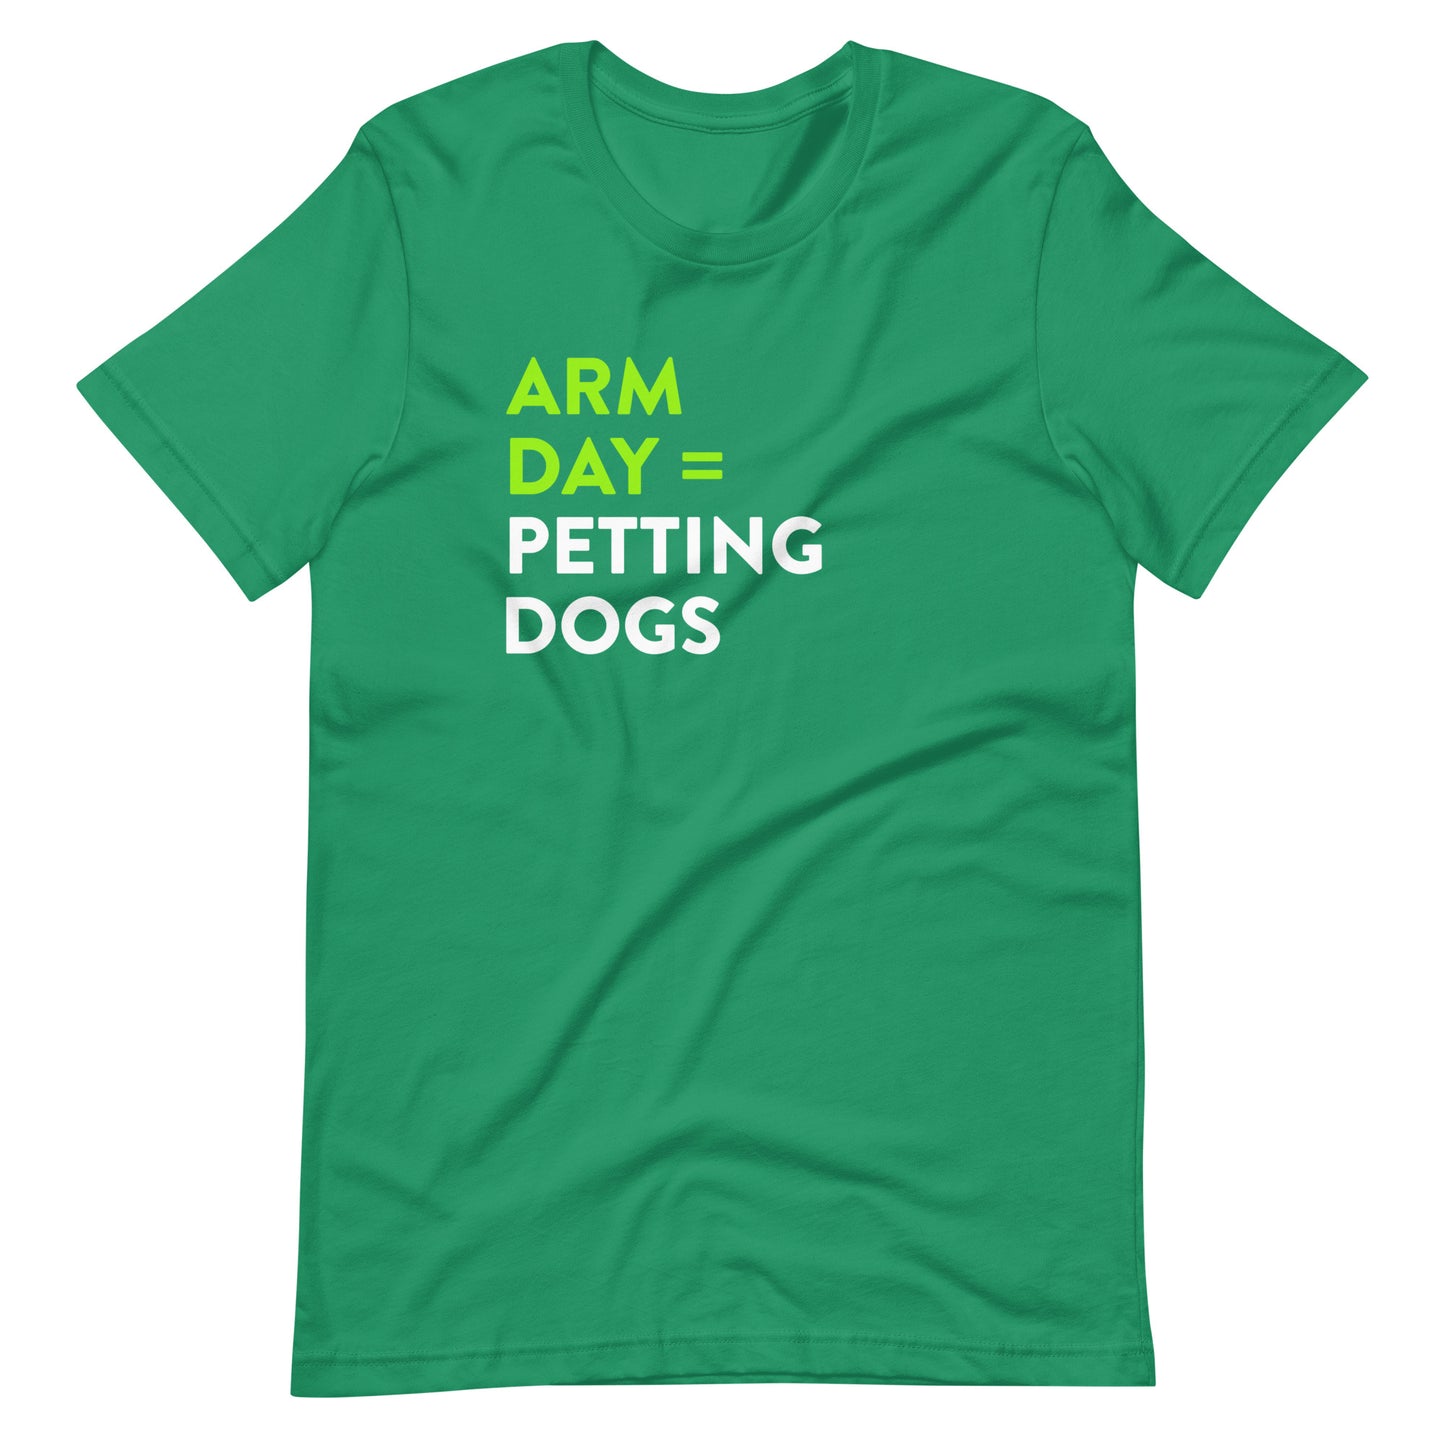 Arm Day = Petting Dogs T-Shirt